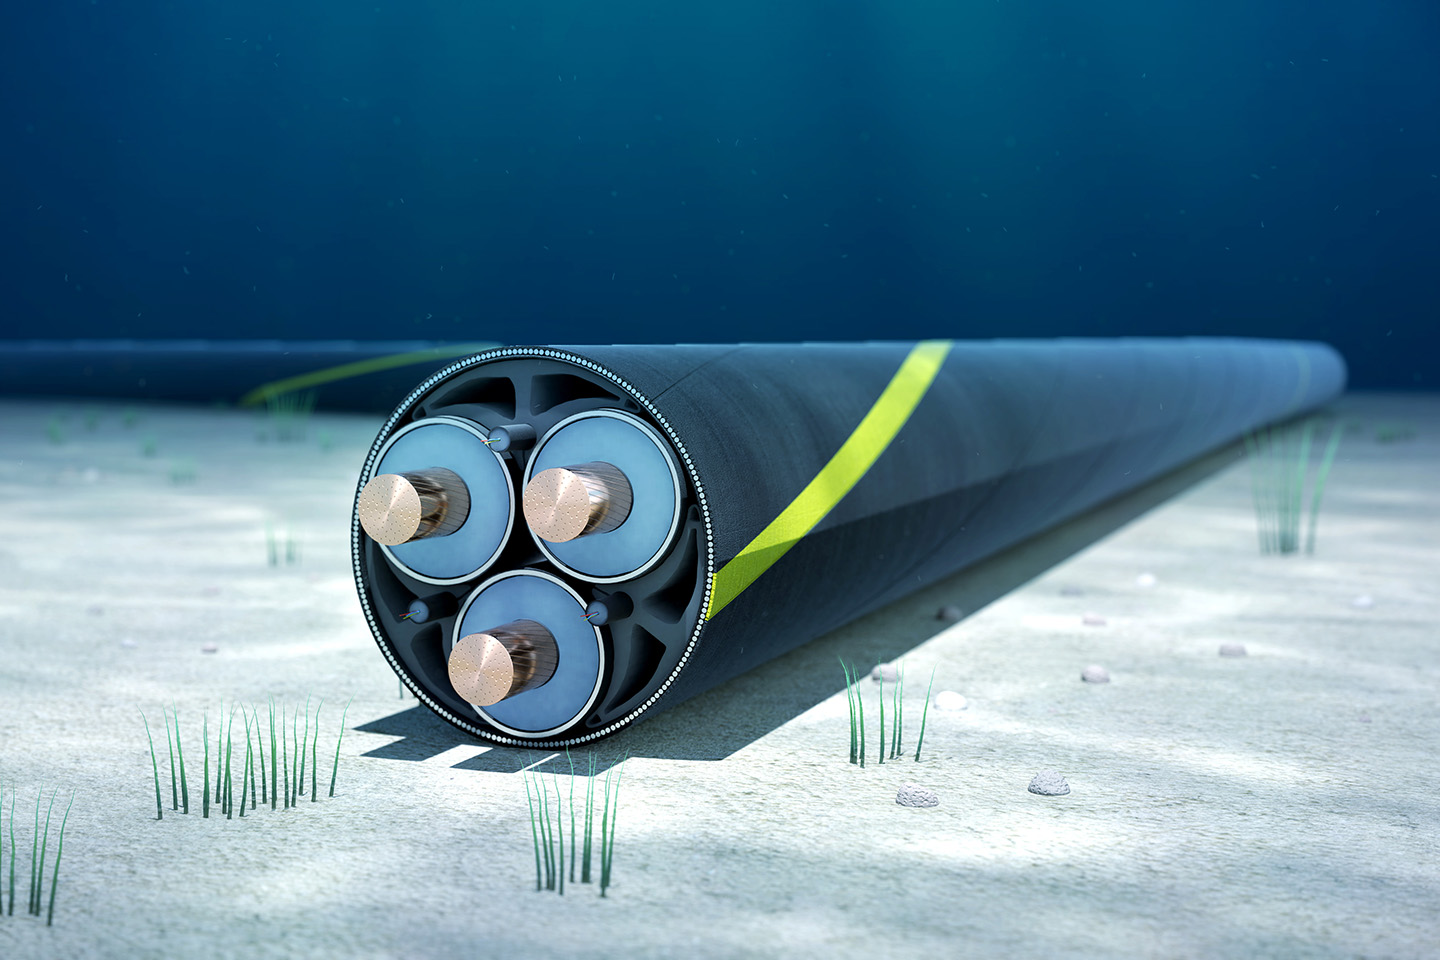 Schematic illustration of an underwater power cable.